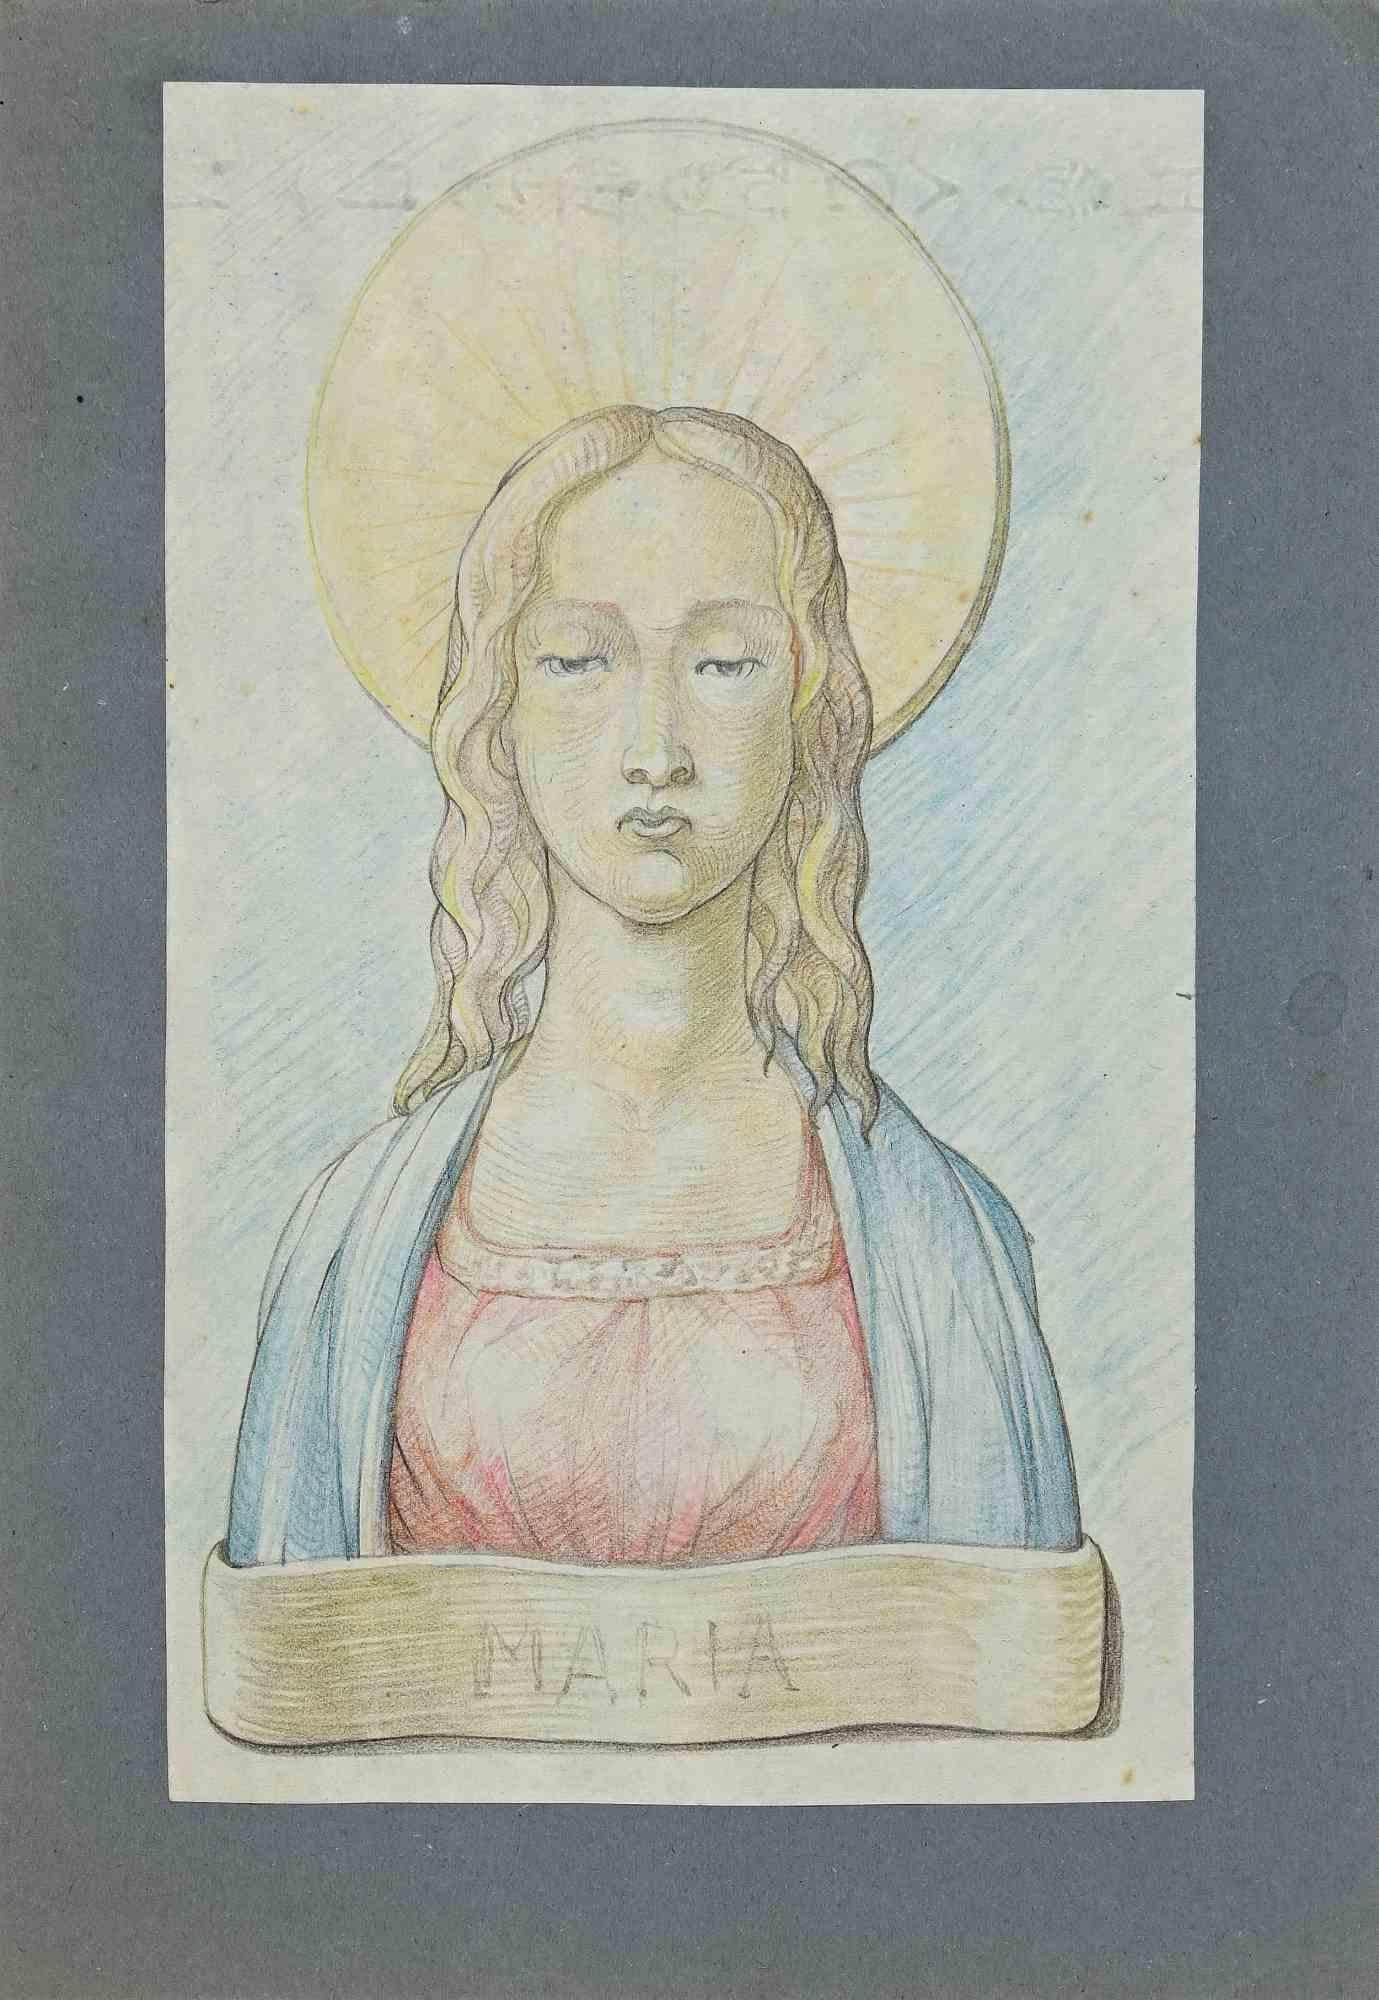 Unknown Figurative Art - Portrait of Virgin Mary - Original Drawing - Early 20th Century